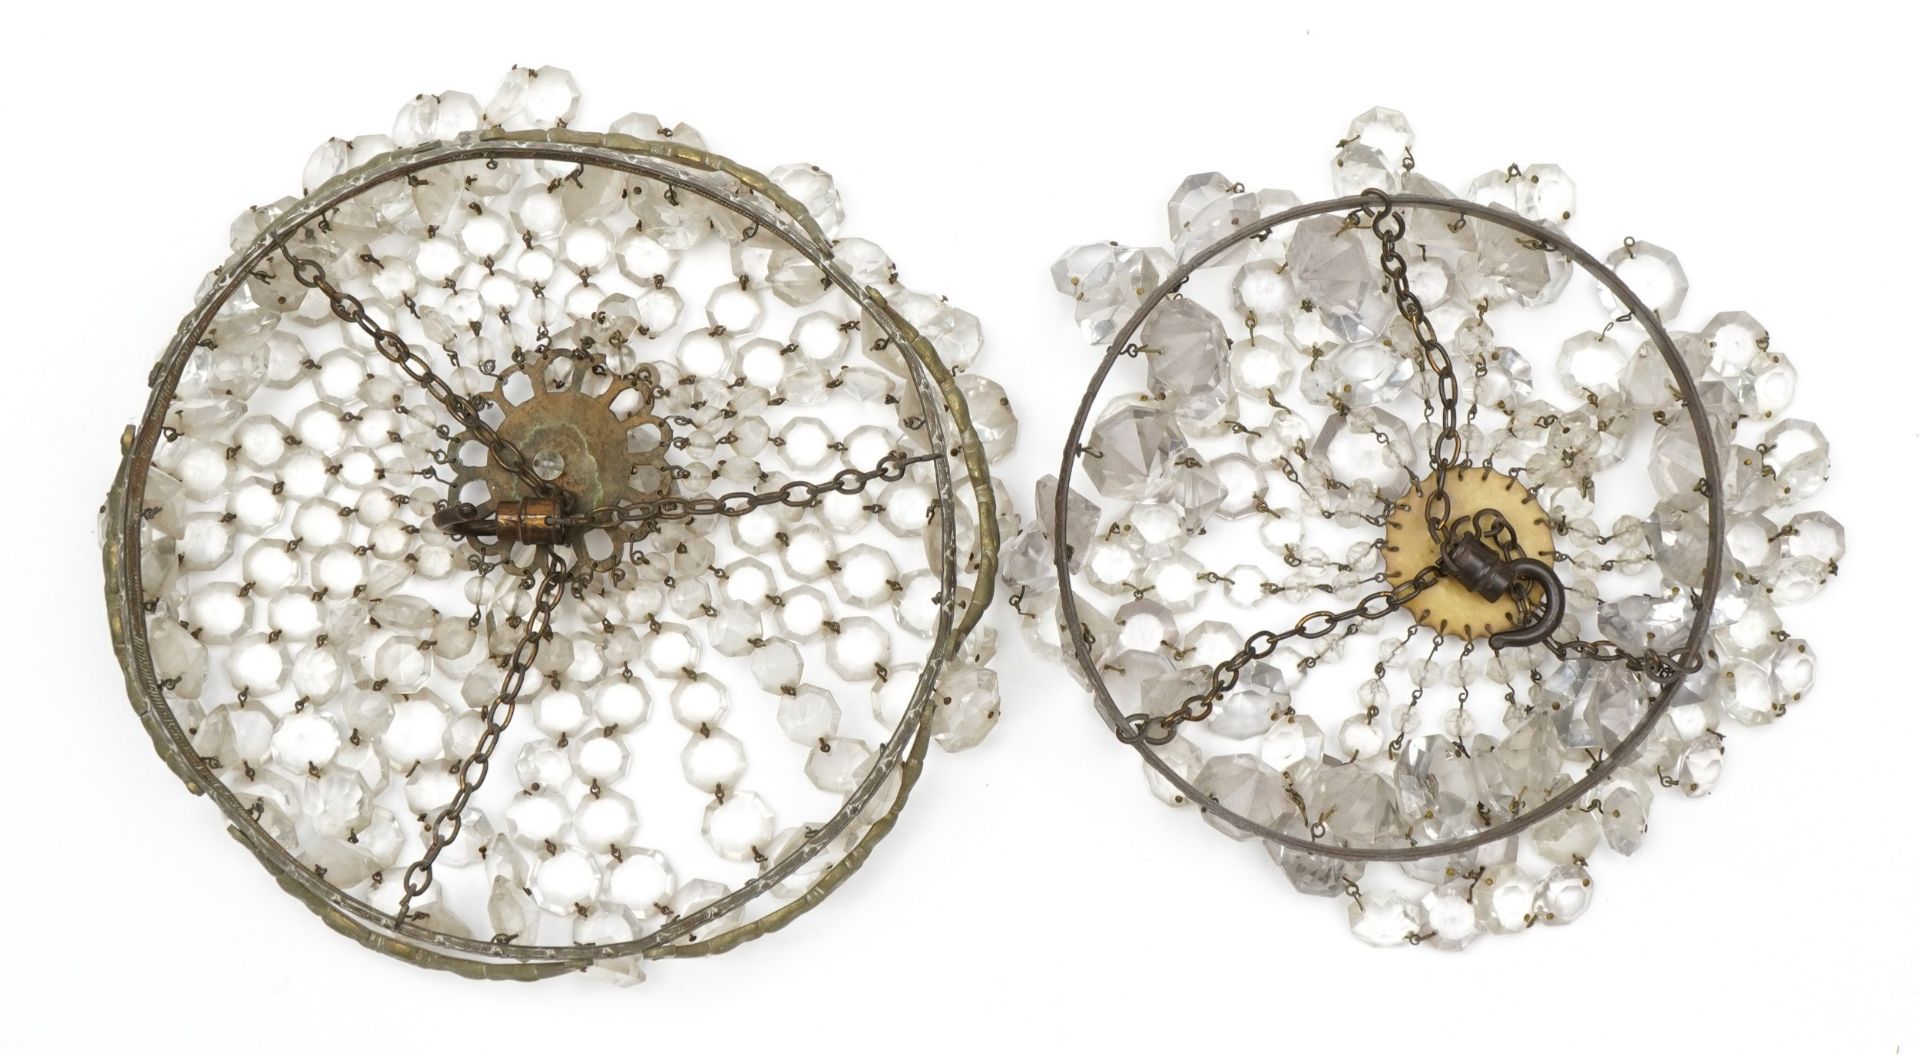 Two brass bag chandeliers with cut glass drops, the largest 26cm in diameter : For further - Image 6 of 6